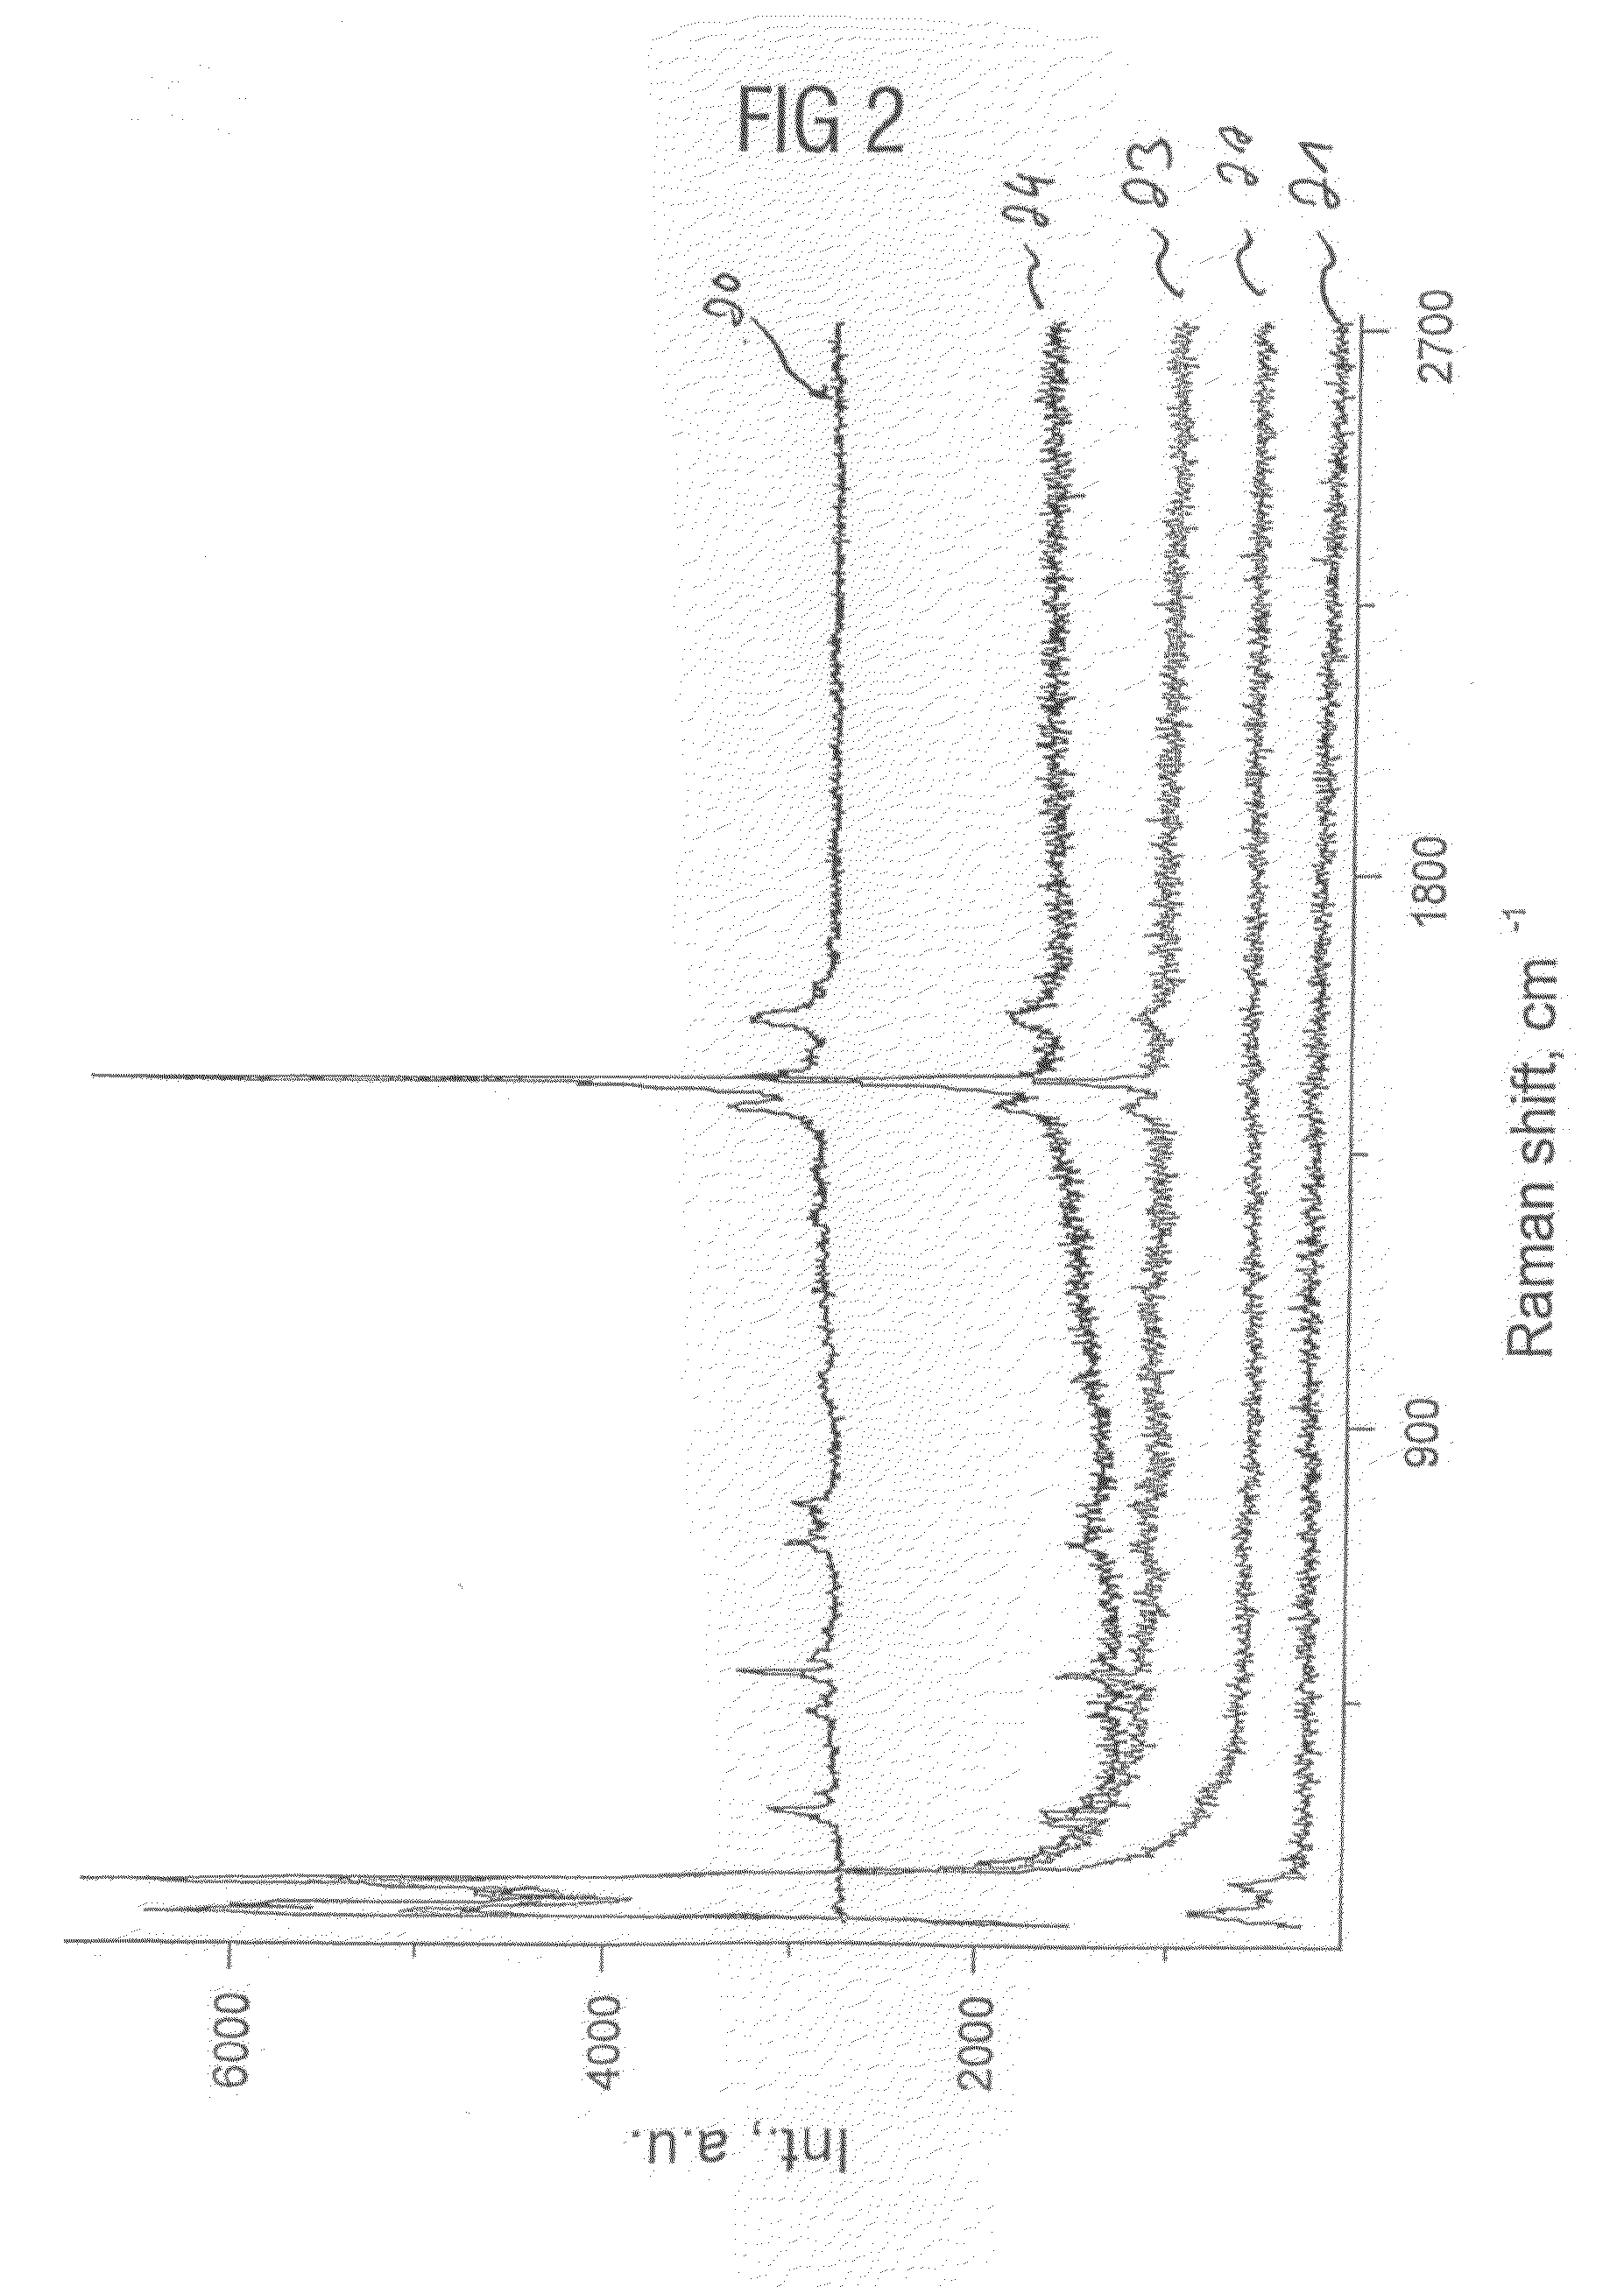 Thermoelectric nanocomposite, method for making the nanocomposite and application of the nanocomposite